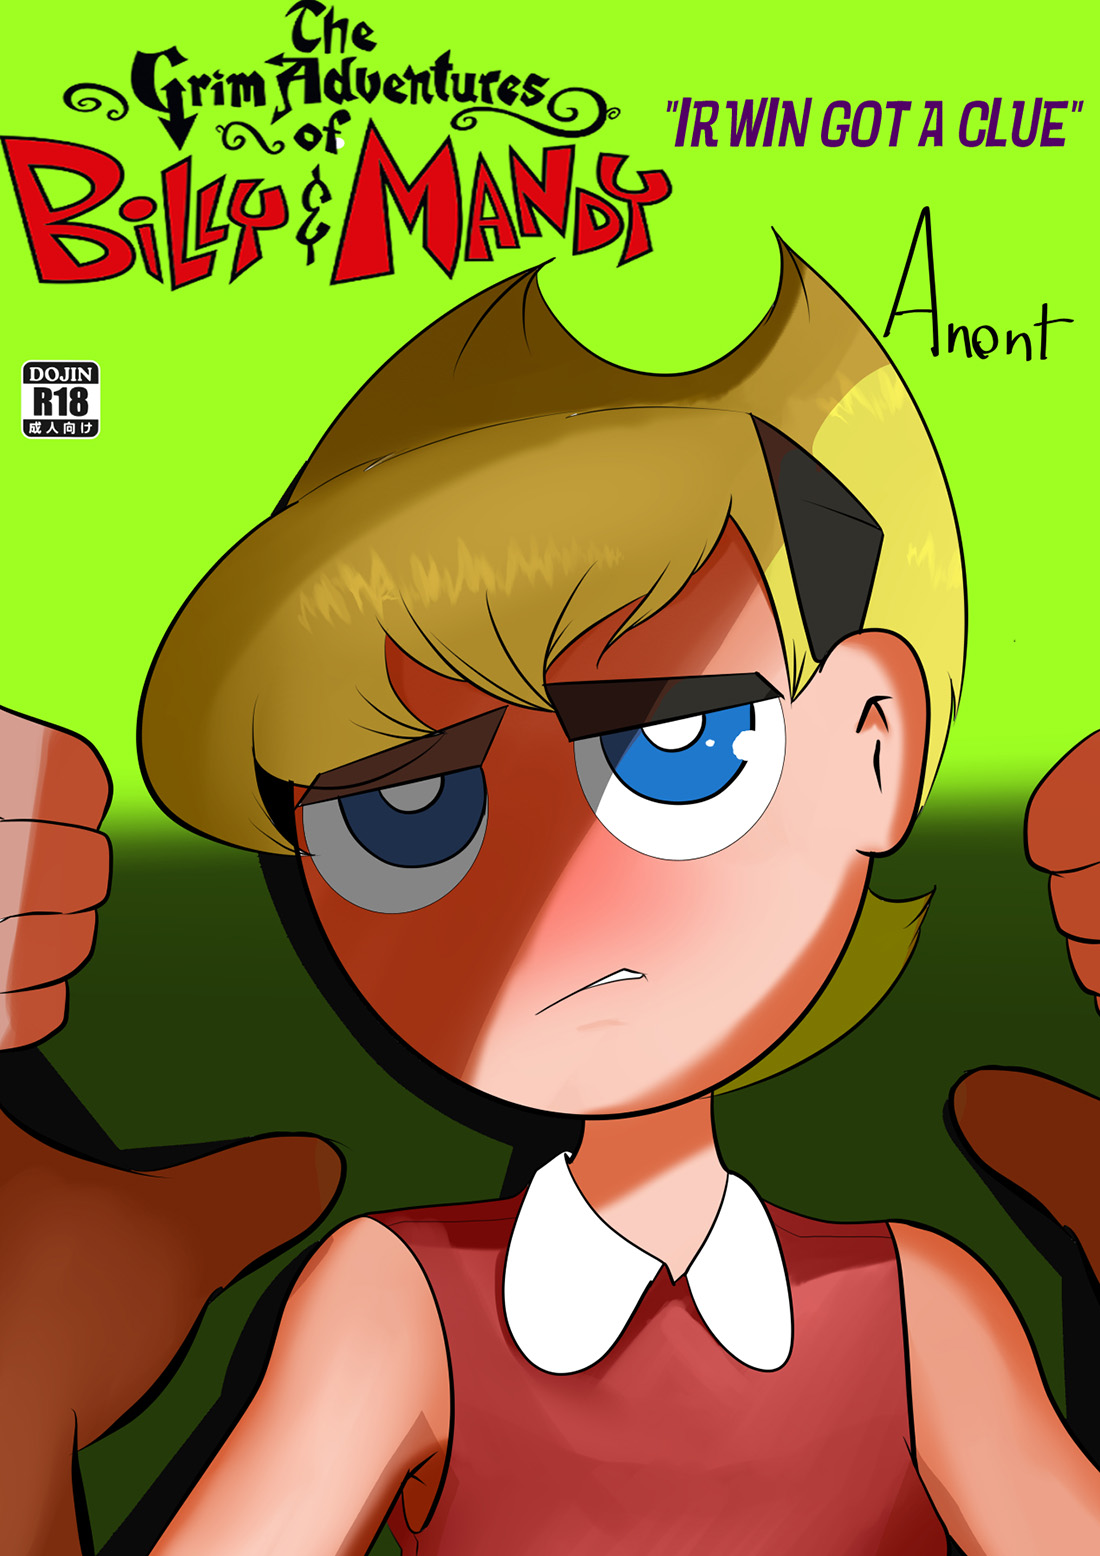 The Grim ADVENTURES of BILLY and MANDY - Irwin Got a Clue